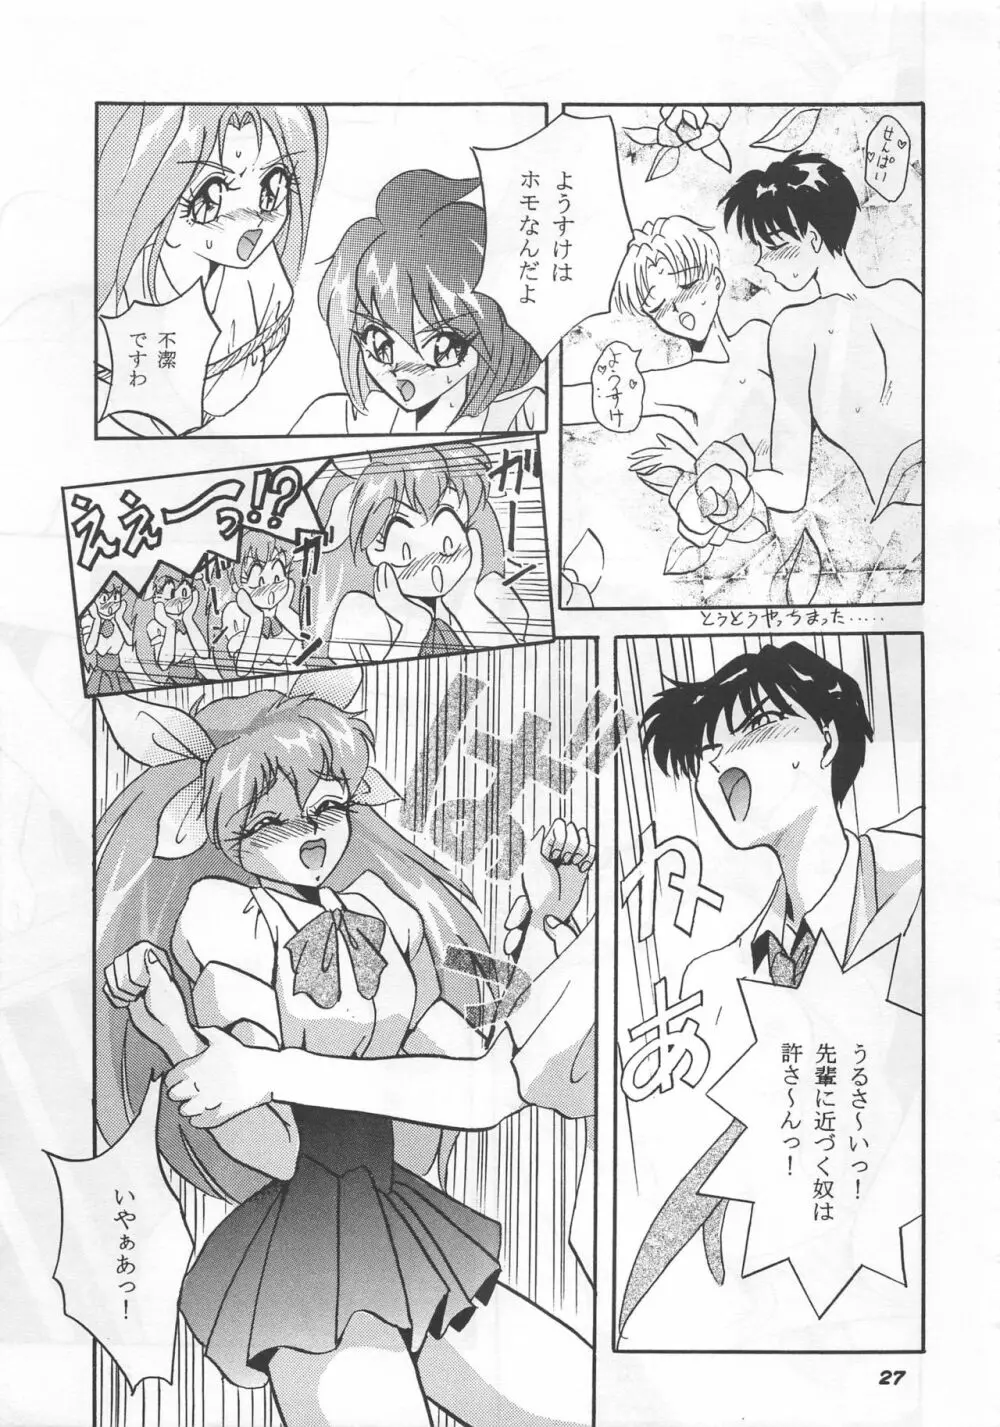 MOUSOU THEATER 5 - page27